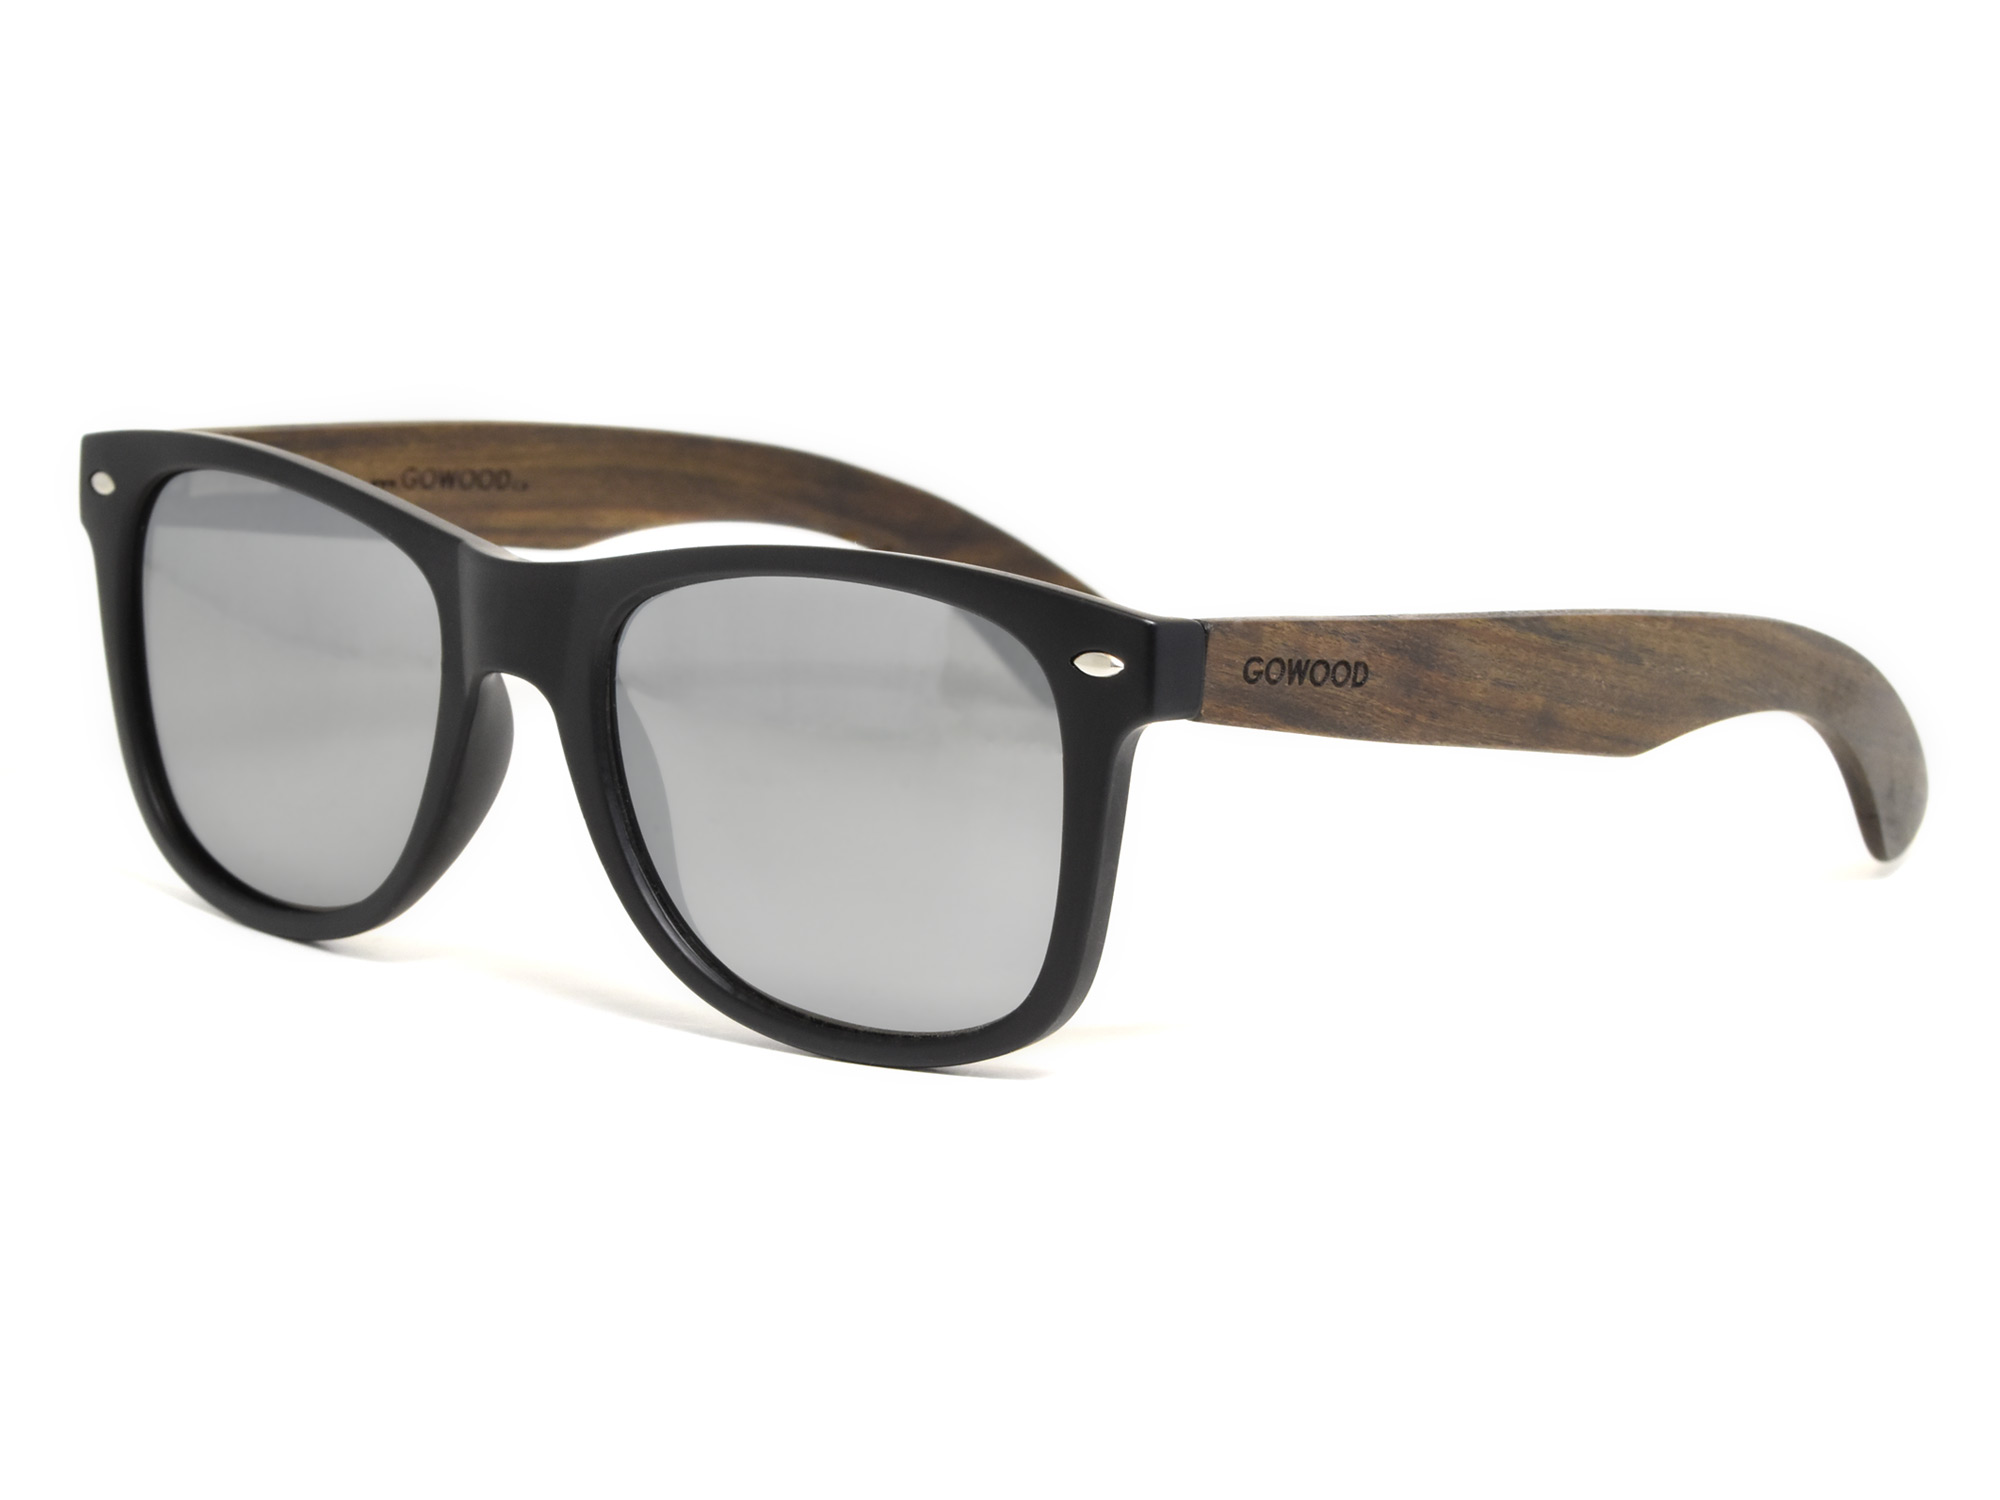 Ebony wood sunglasses with silver mirrored lenses